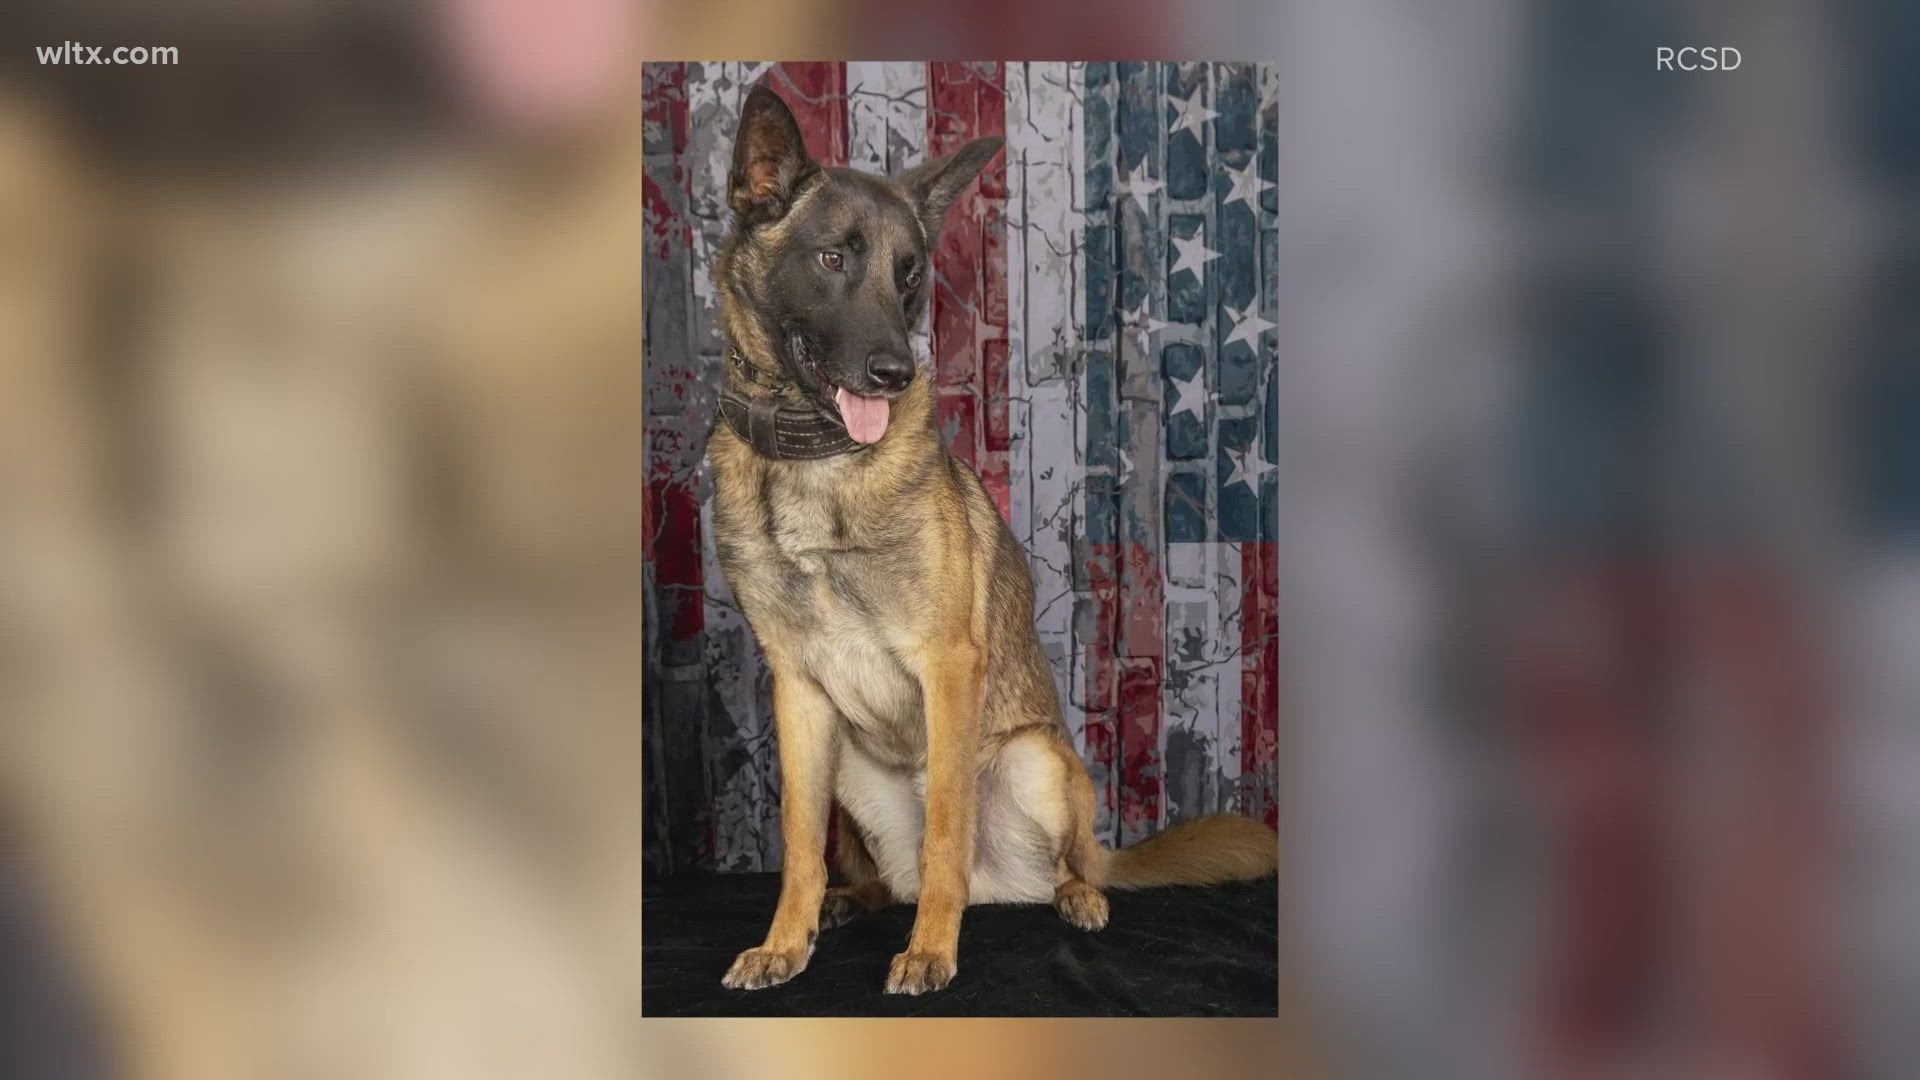 The K9 Wick, was killed in the early morning hours by a car on I-77.